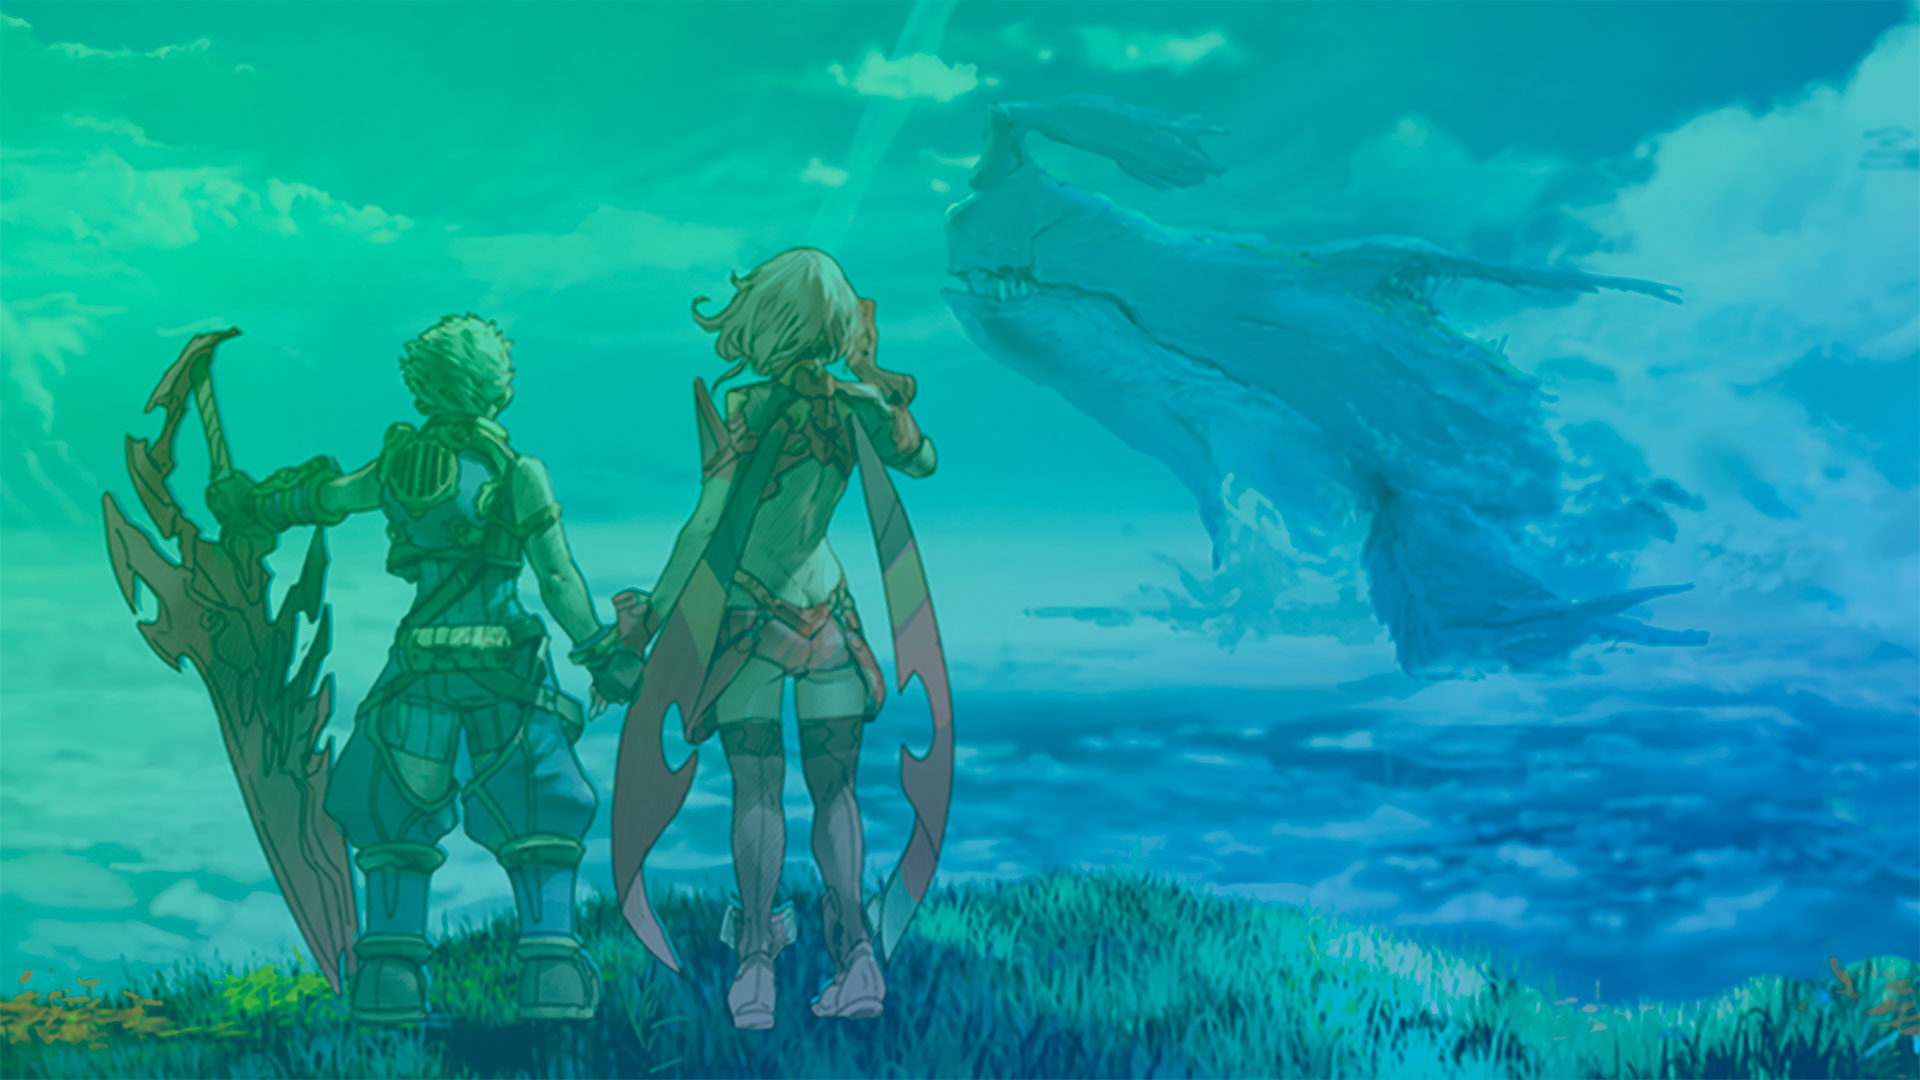 Xenoblade Chronicles 2 Wallpapers in Ultra HD | 4K - Gameranx